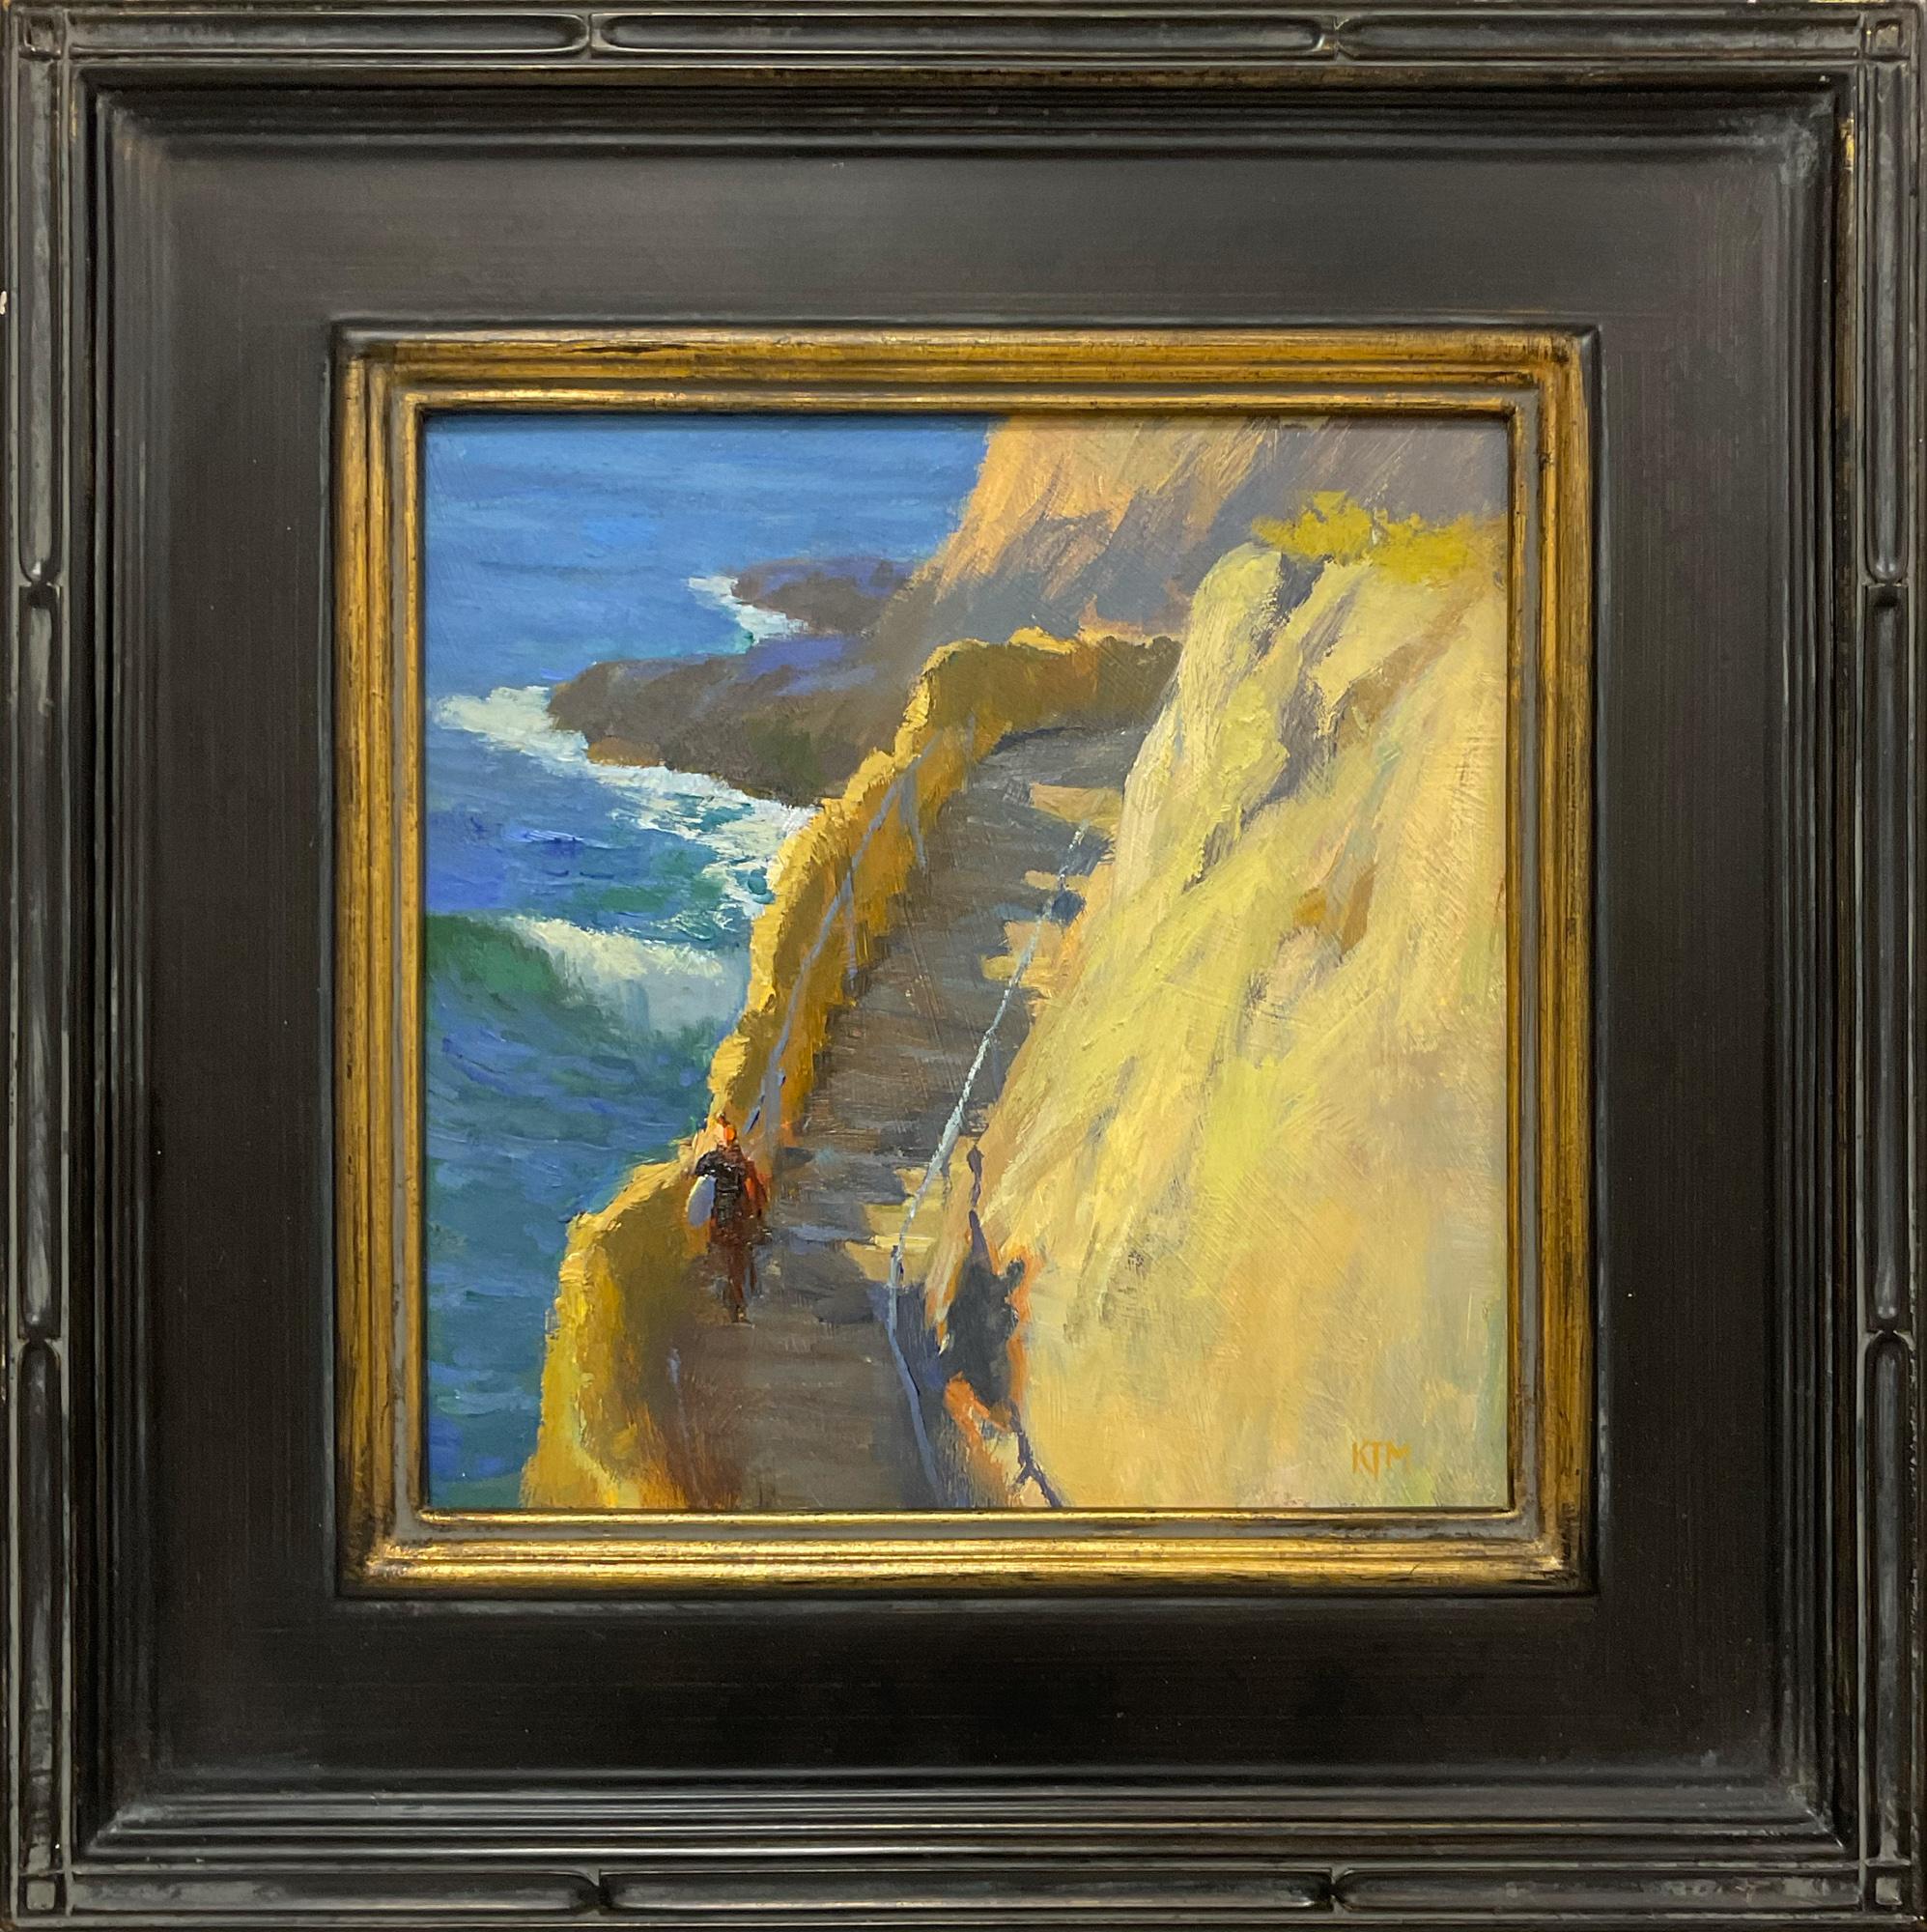 Kristian Matthews Landscape Painting - "Headed Down" Plein Air Oil Painting of Cliff side, Ocean and Surfer